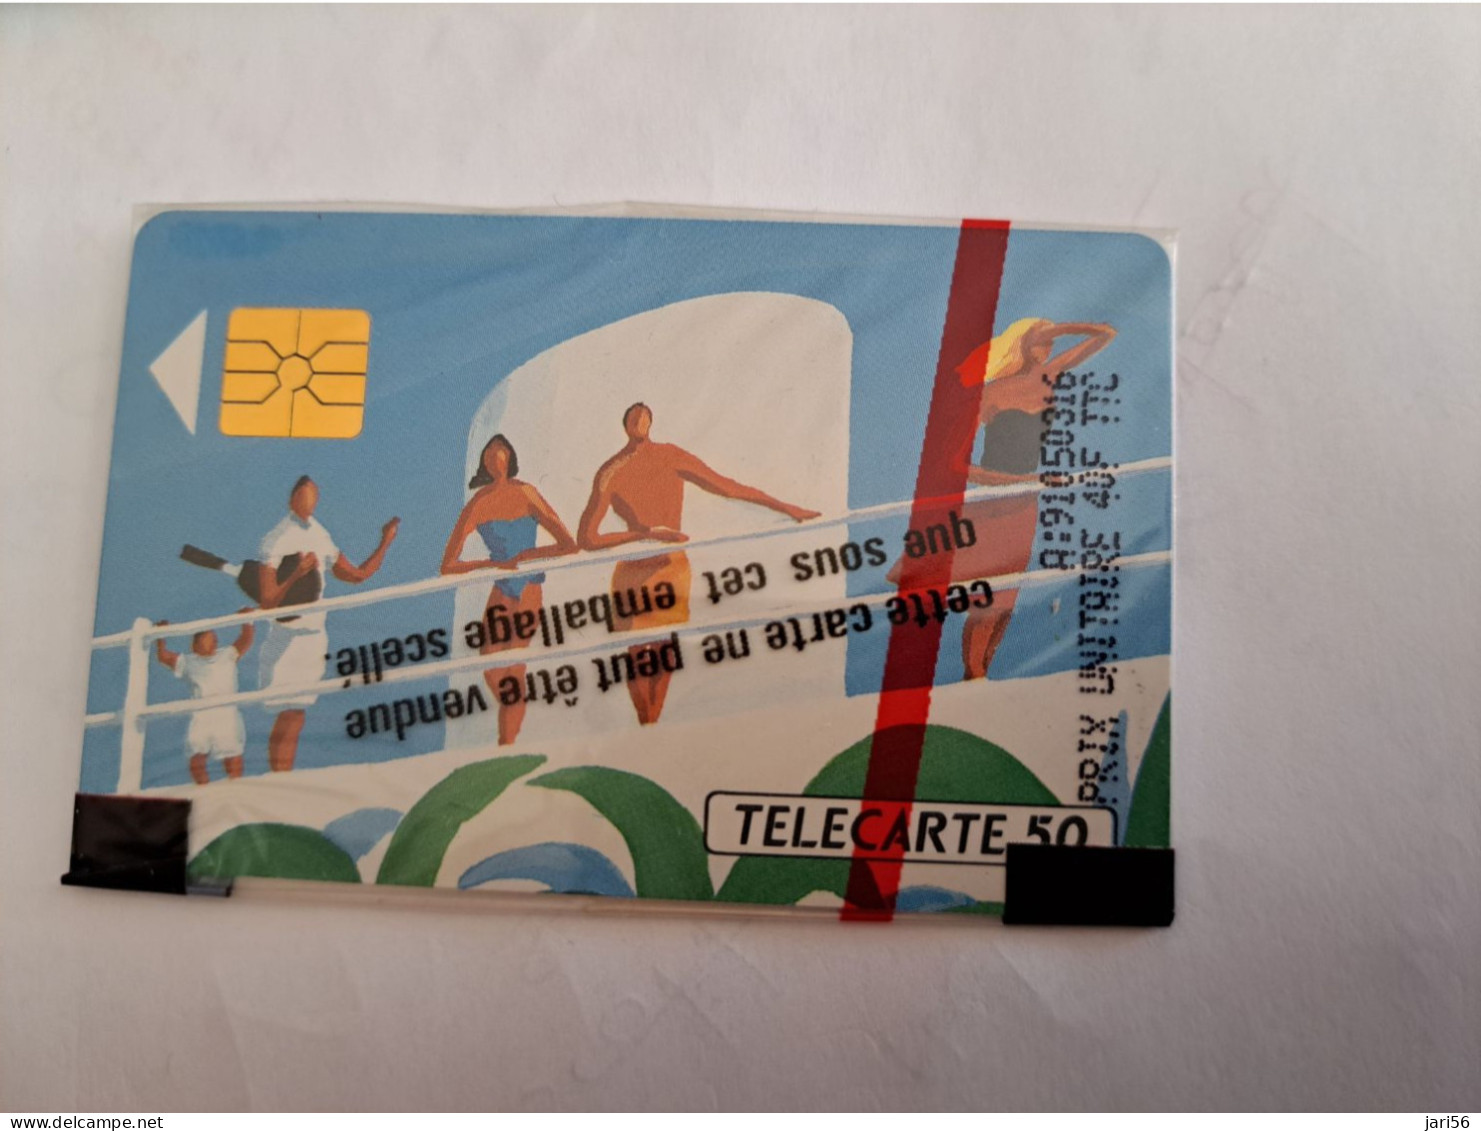 FRANCE/FRANKRIJK   CHIPCARD   50 UNITS / FOREST HILL    MINT IN WRAPPER     WITH CHIP     ** 14111** - Nachladekarten (Handy/SIM)